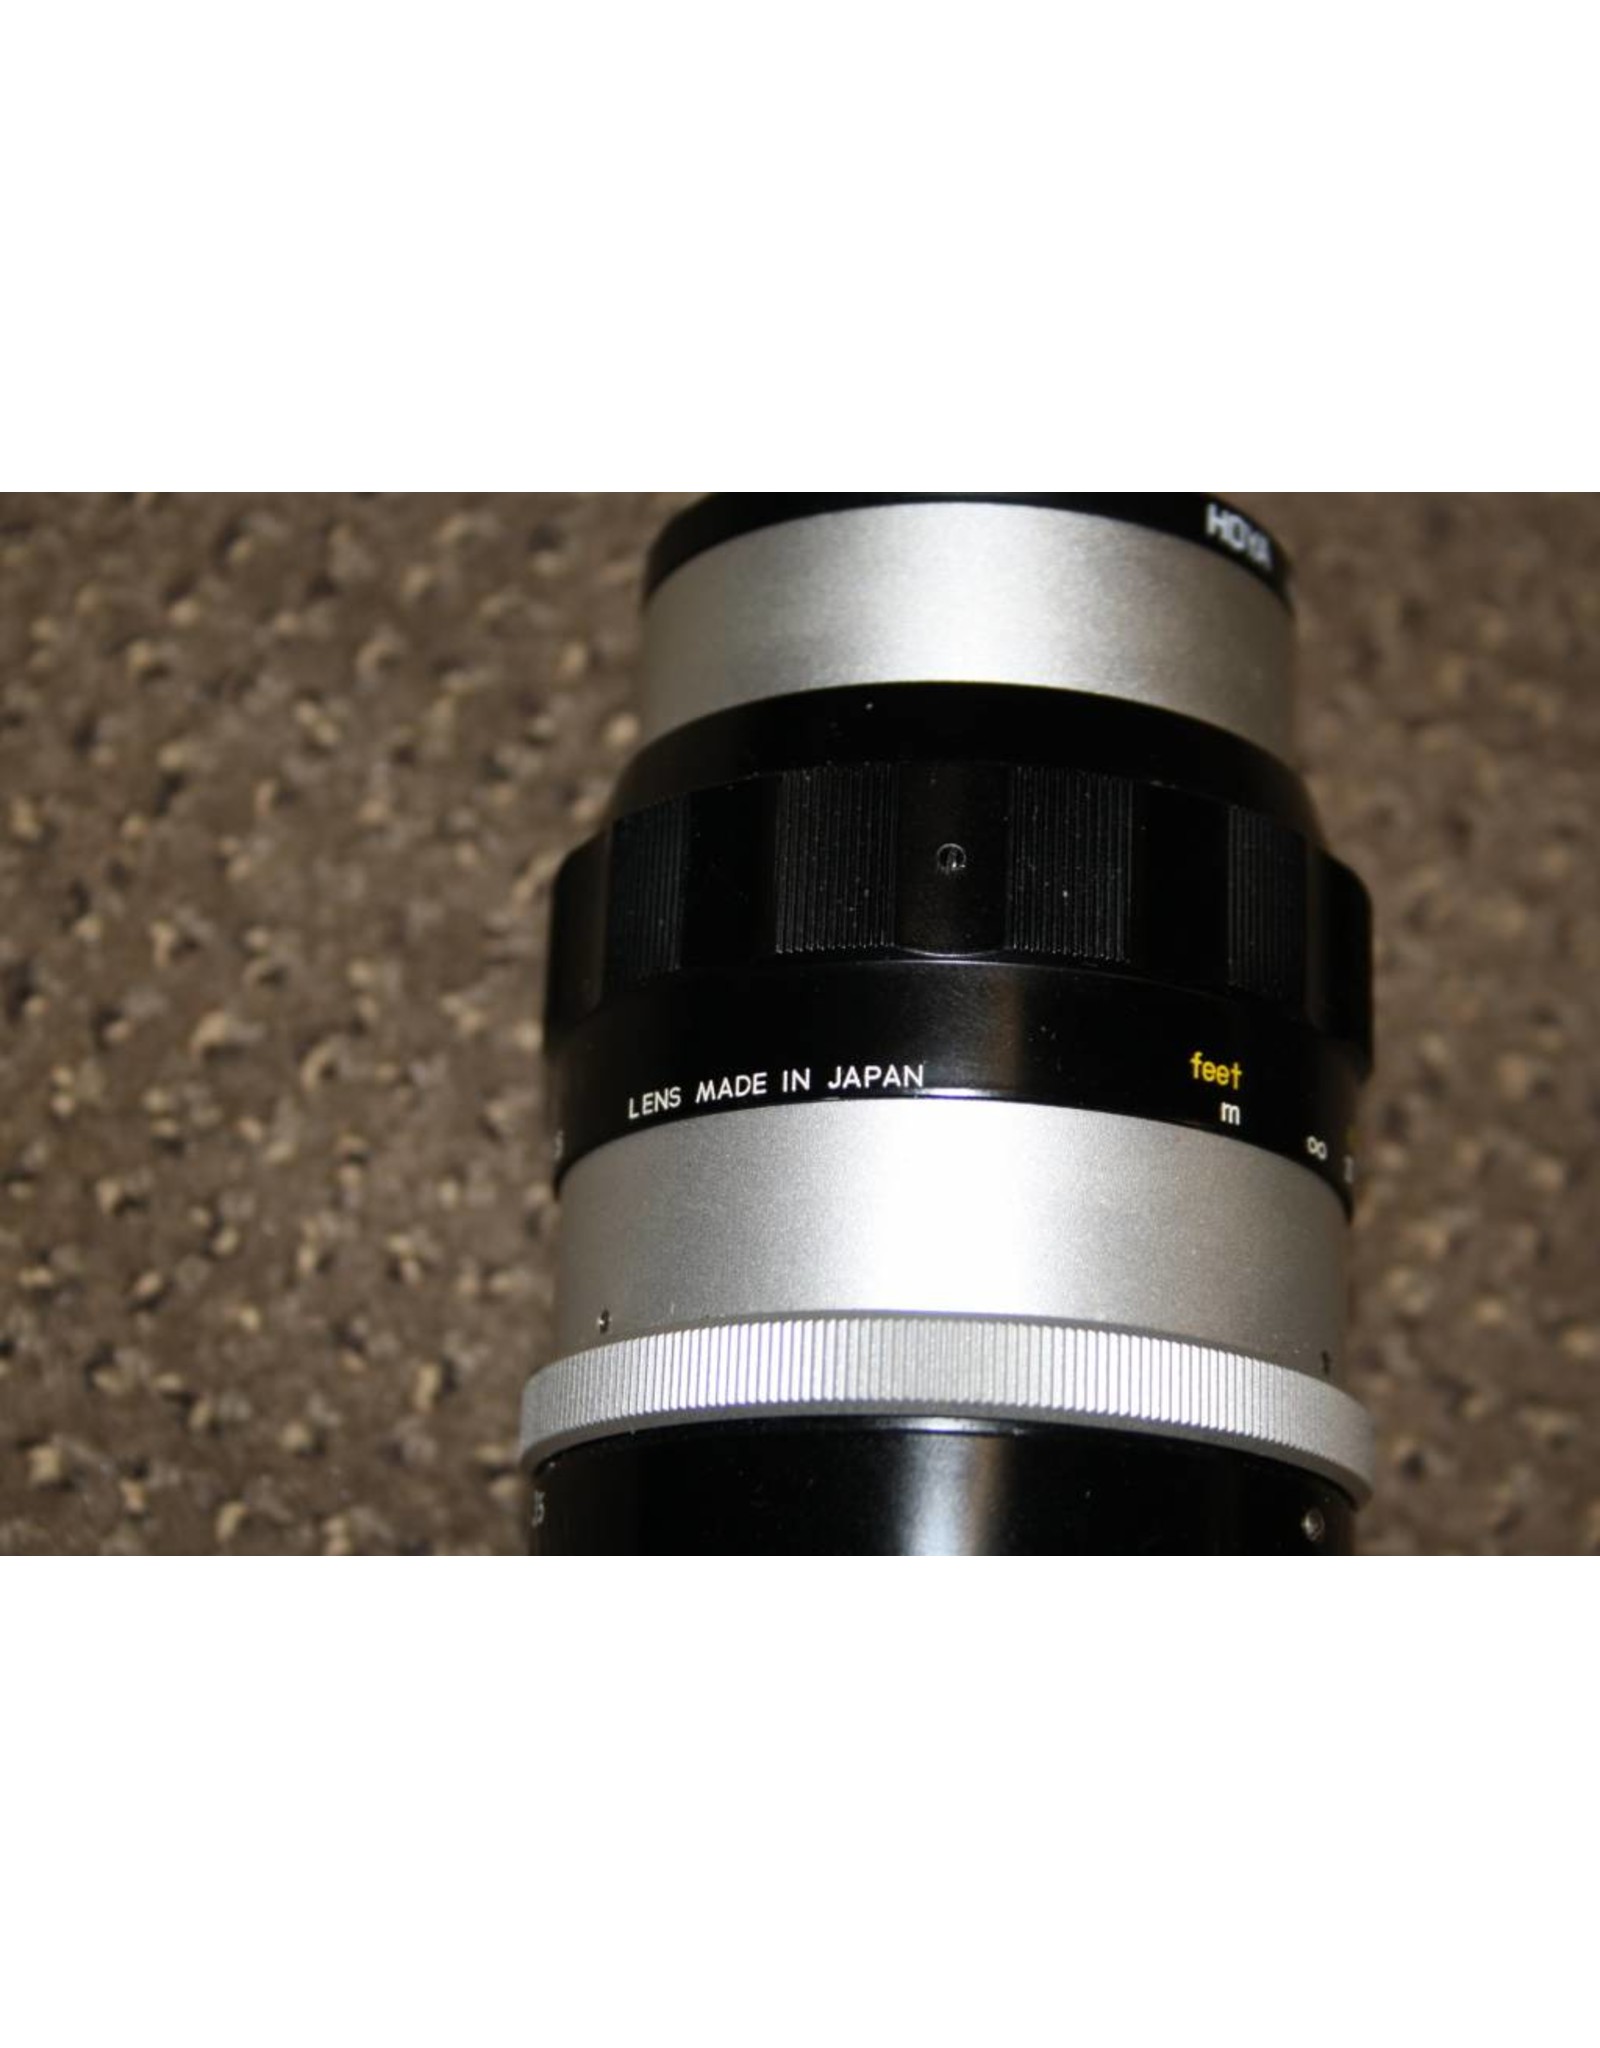 Nikon Nikon Nikkor-Q 135mm f3.5 Photomic non-AI Lens with Hood, filter and caps(Pre-owned)